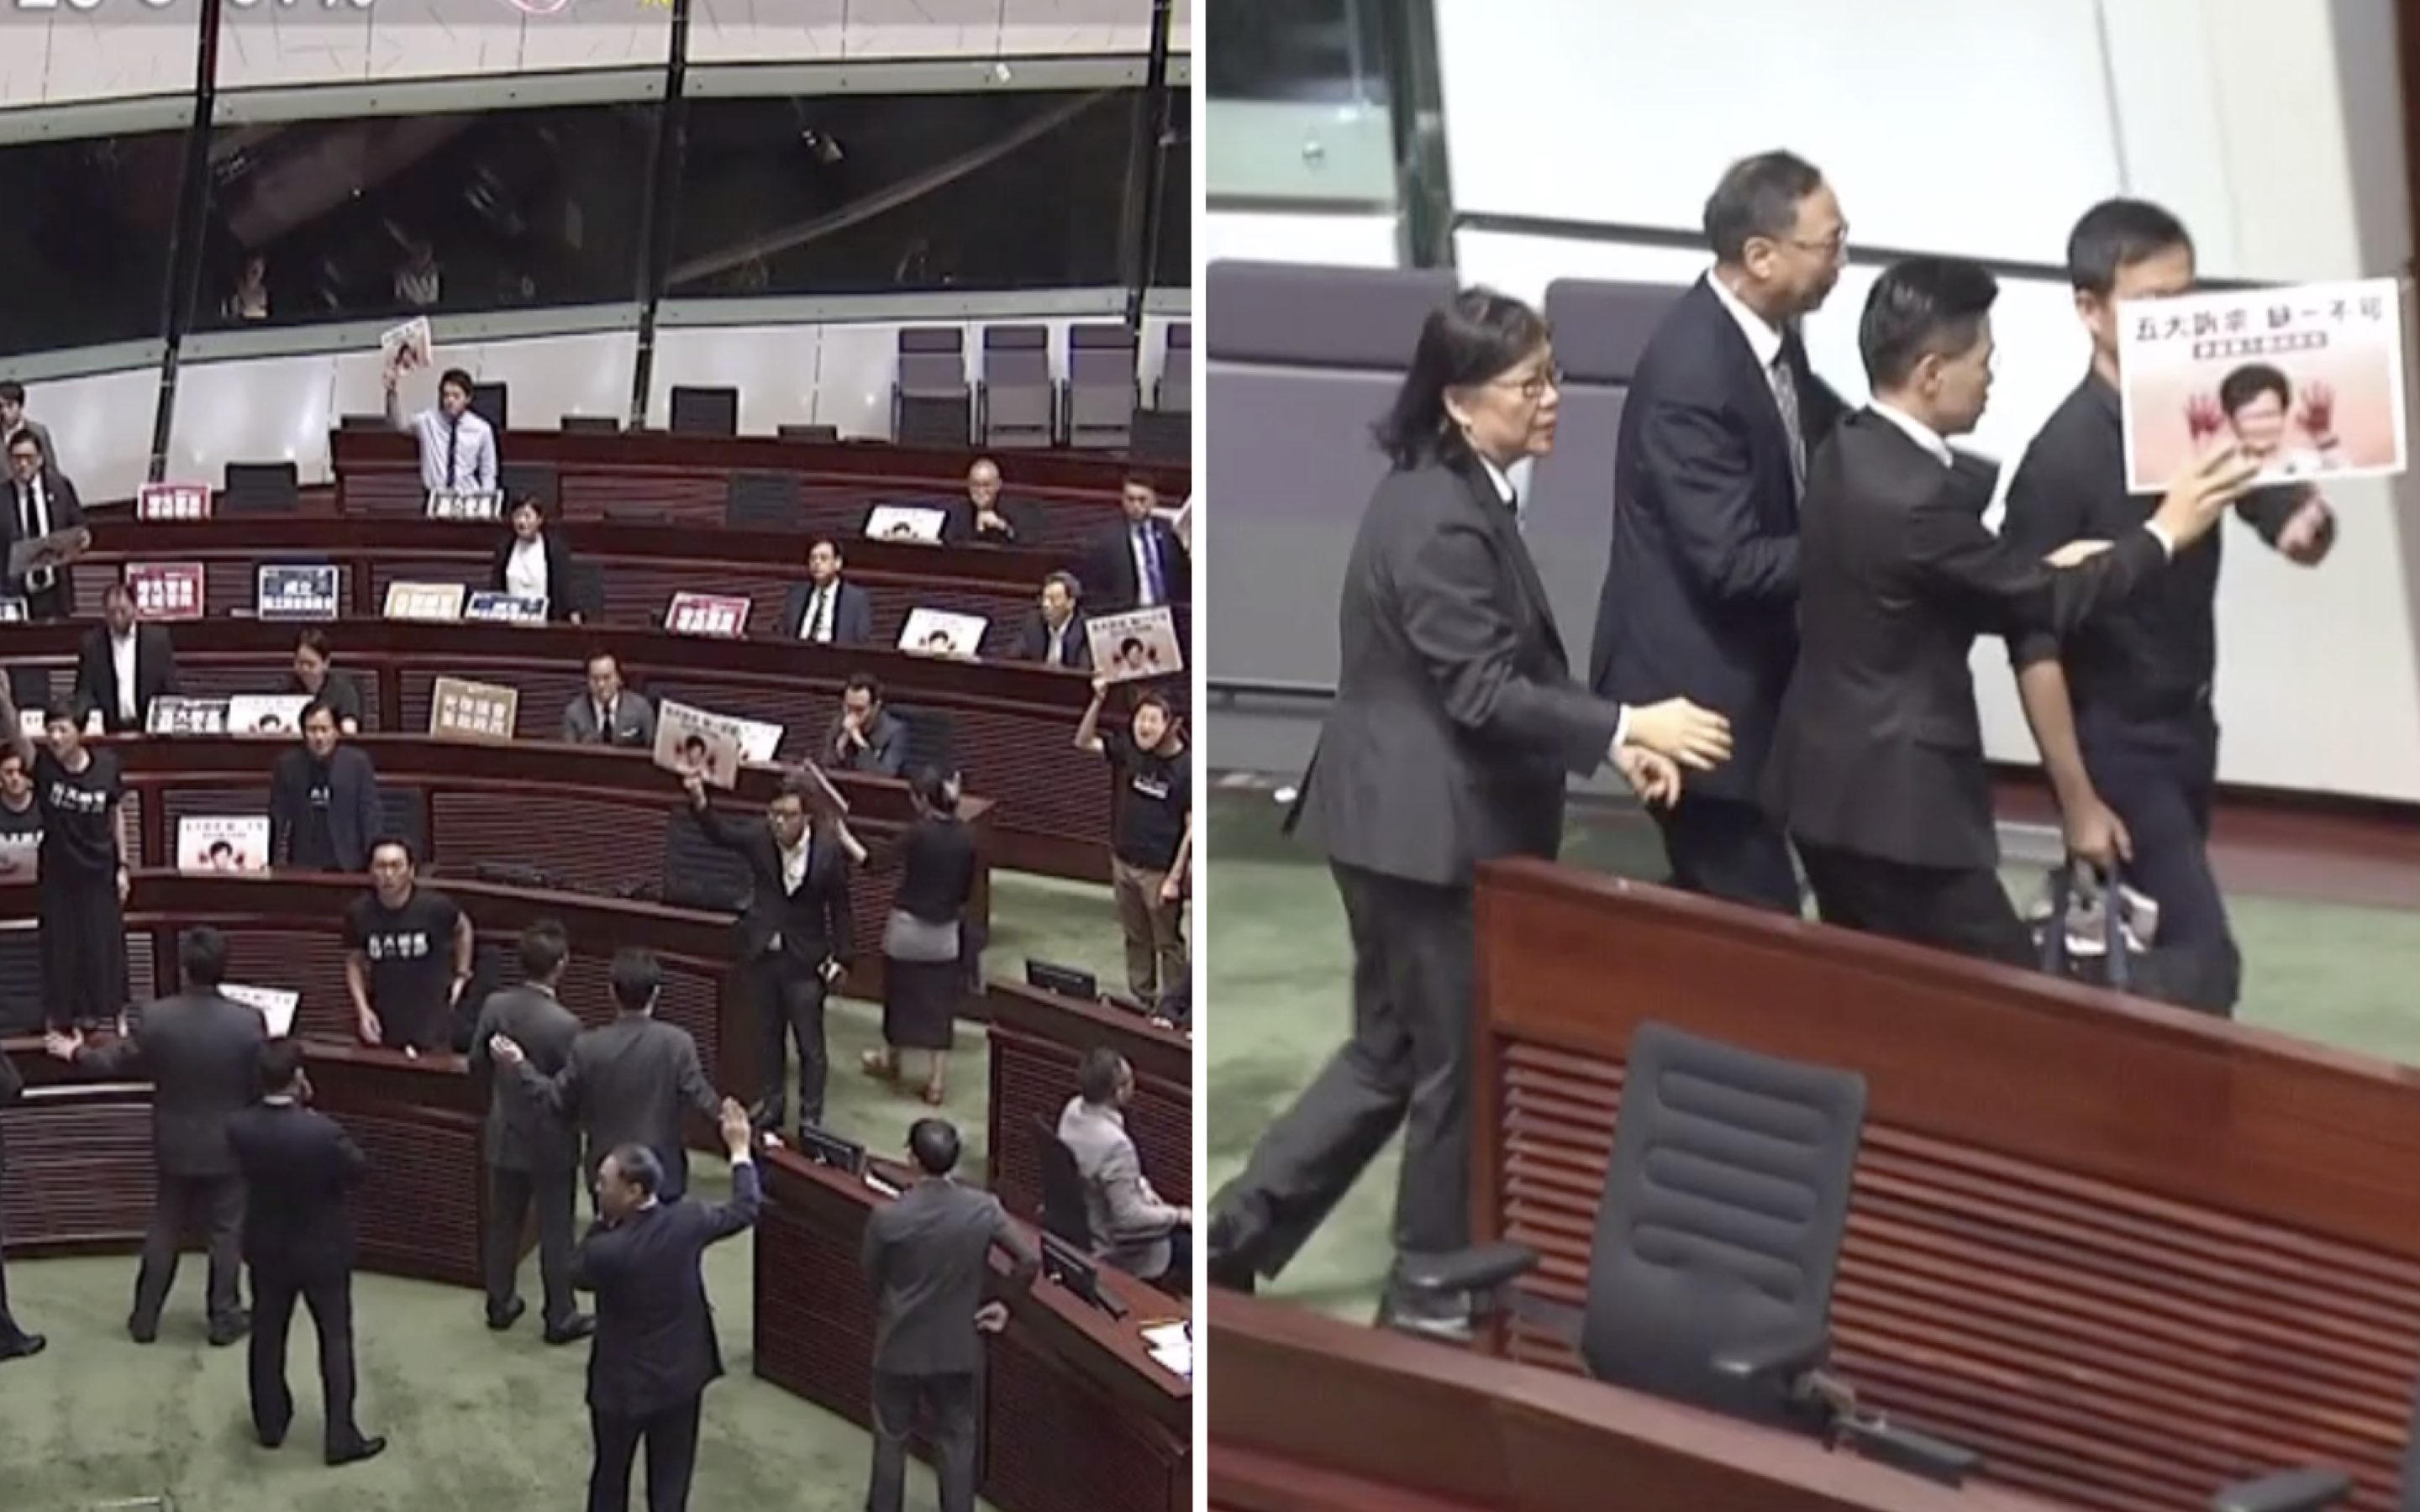 Pro-democracy lawmakers disrupt opening of Carrie Lam’s policy address (left), lawmaker Ray Chan is escorted from the chamber (right). Screengrab via Facebook video/Now News.